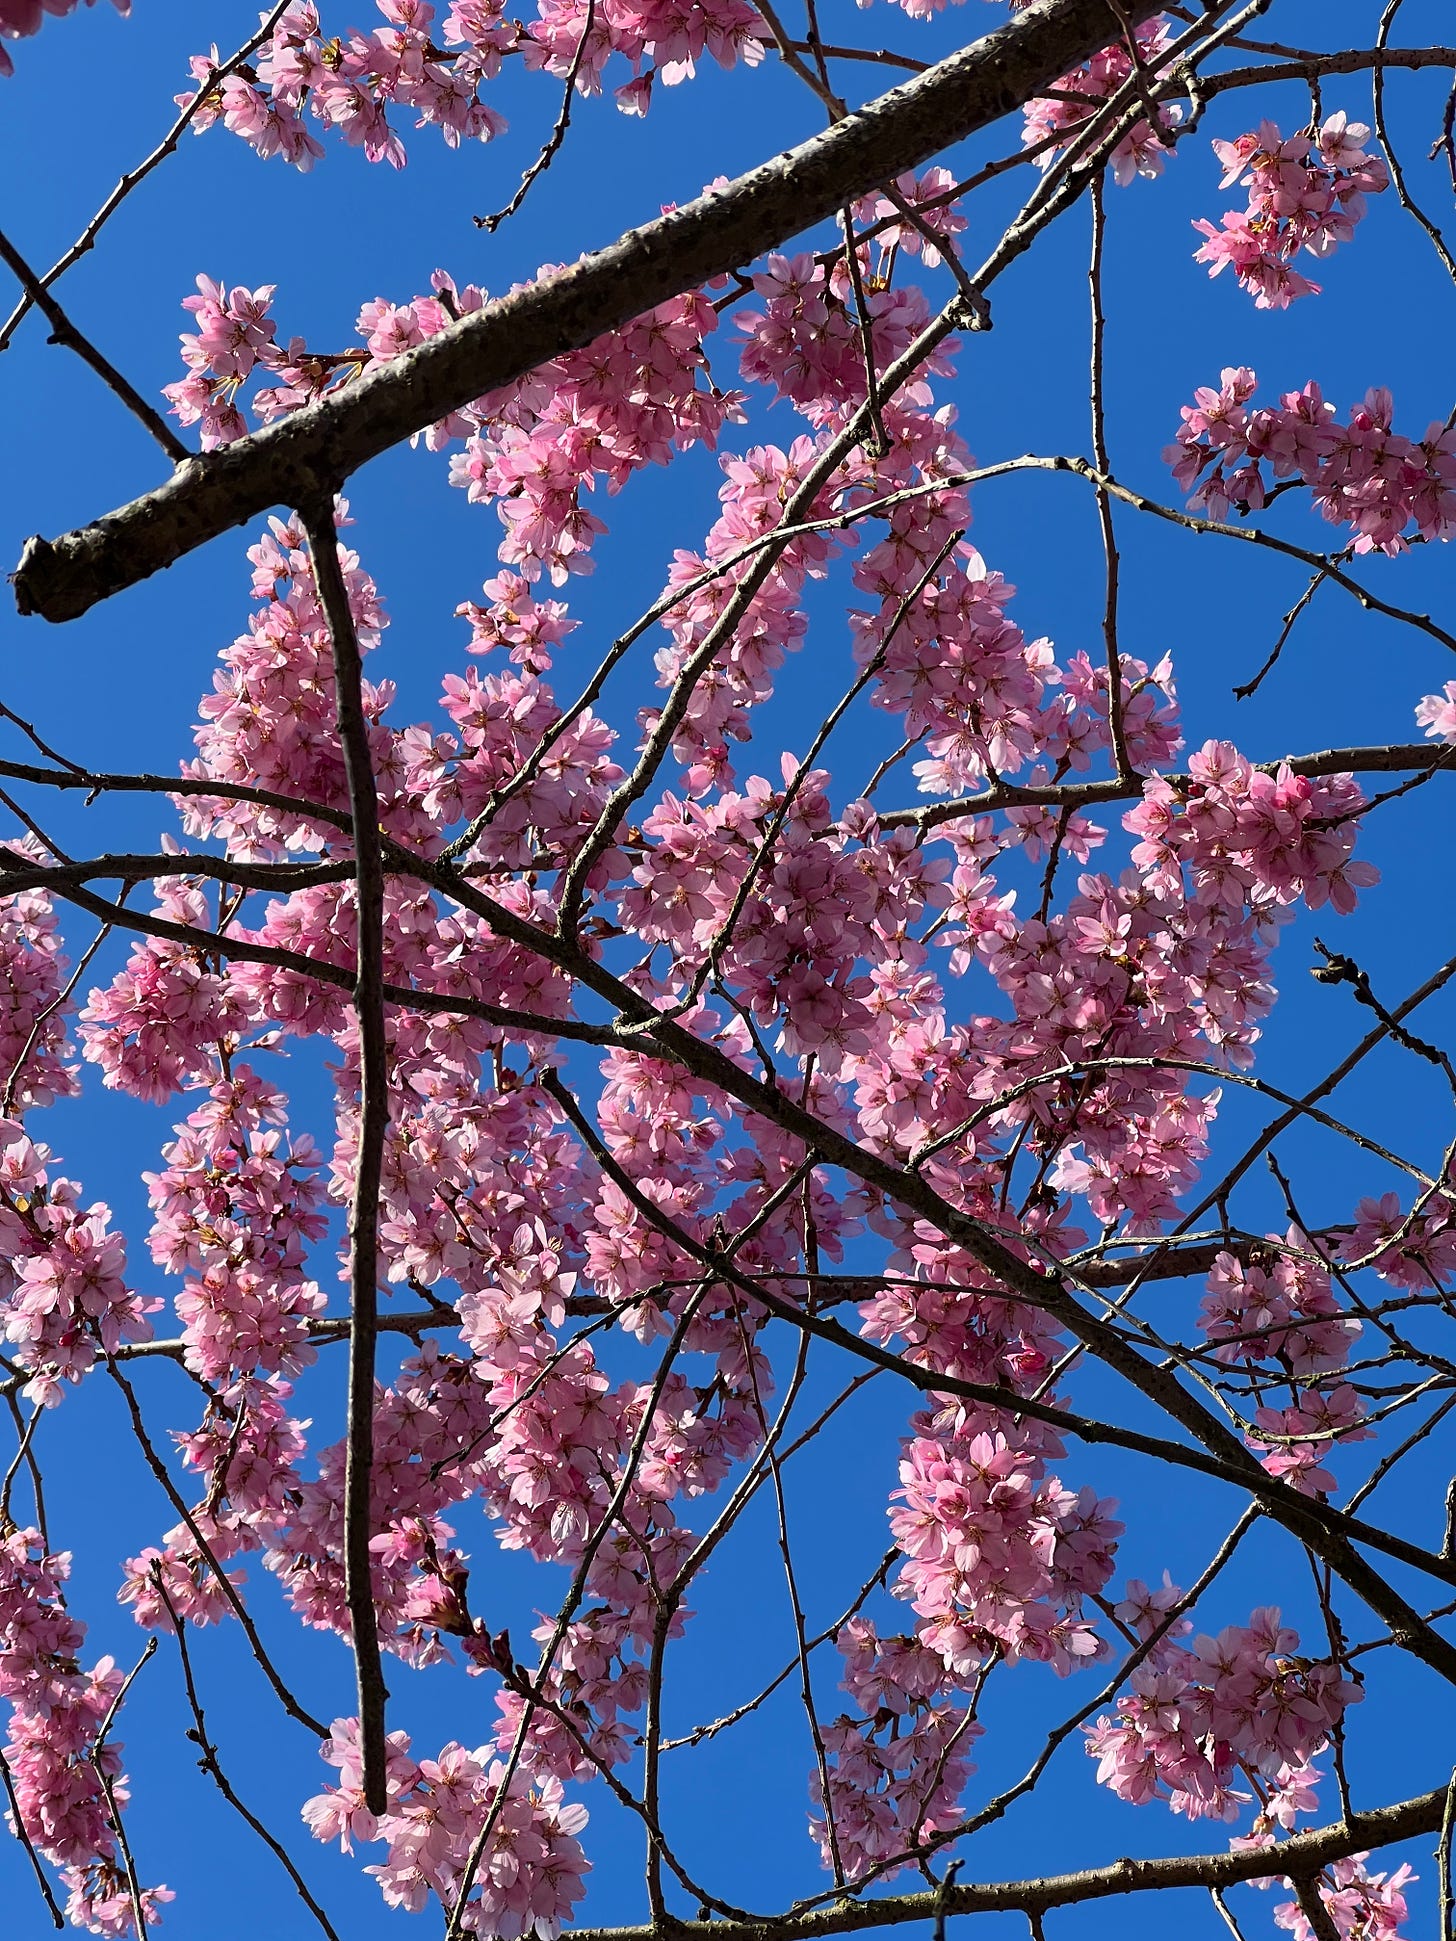 A photo of pink blooming branches against blue sky.